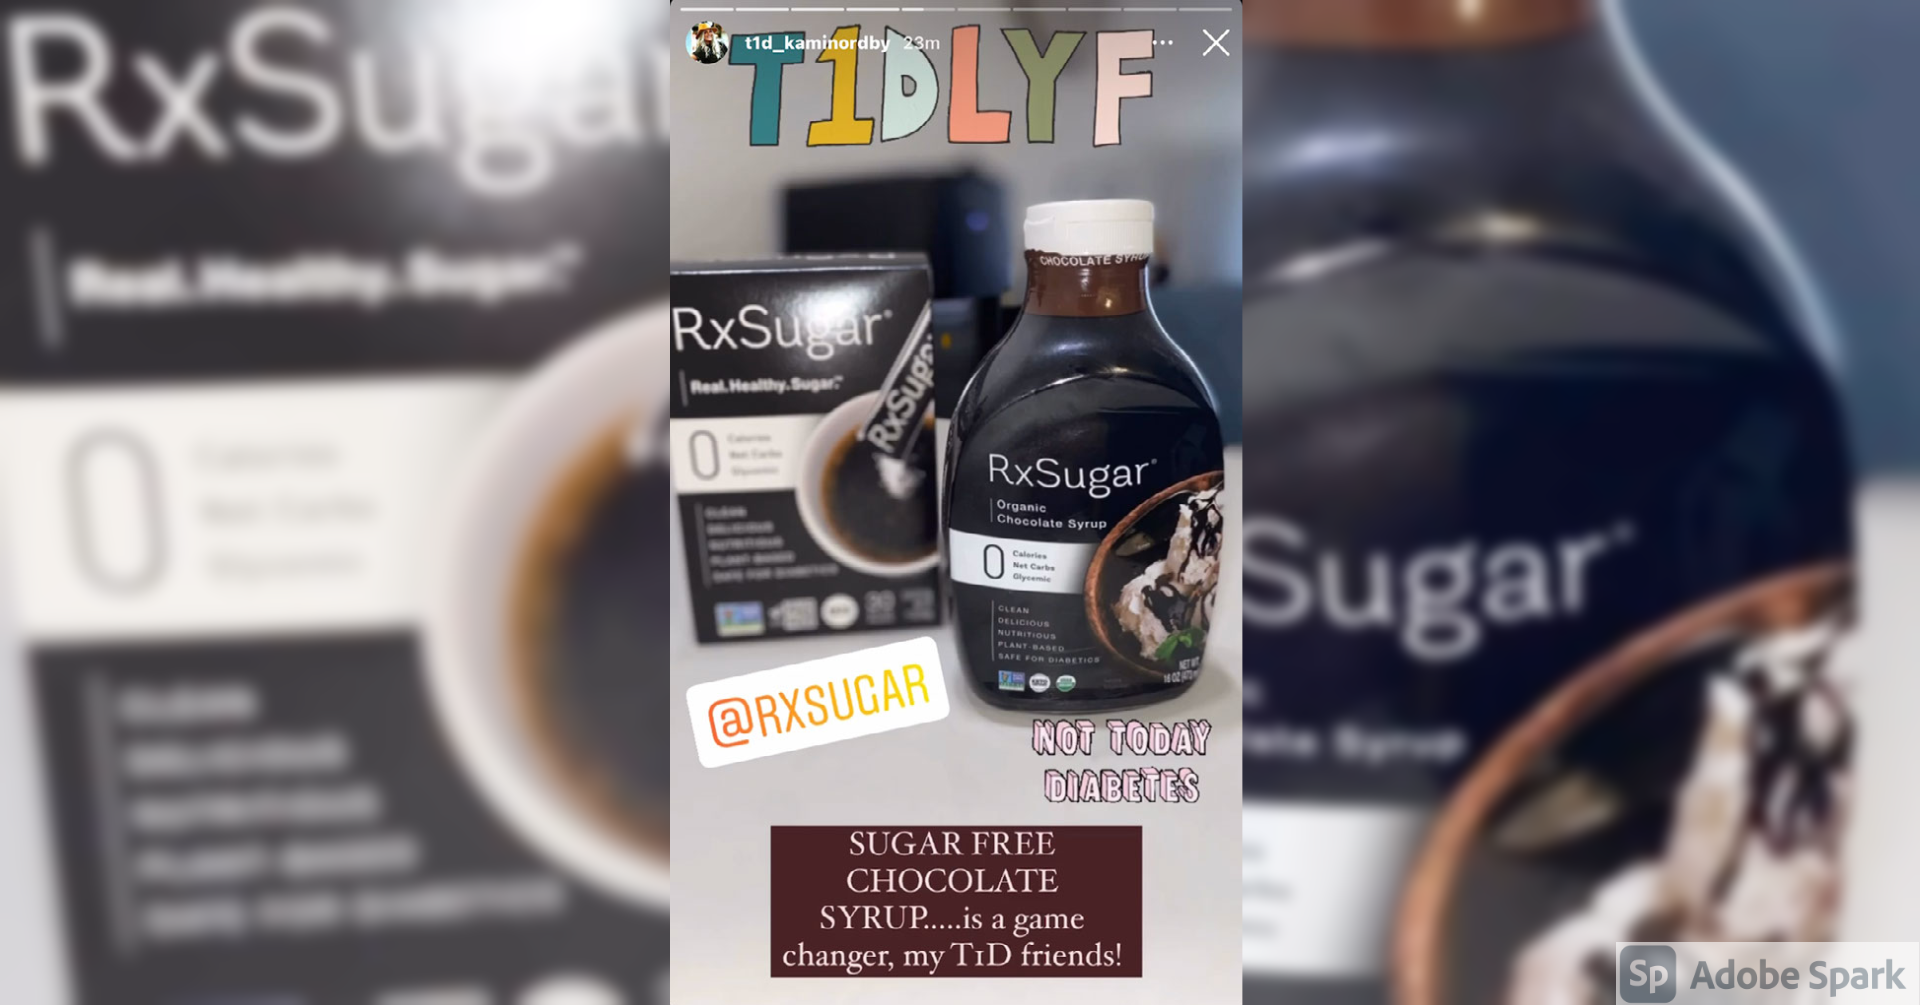 T1D Kami Nordby Loving Her RxSugar Organic Chocolate Syrup